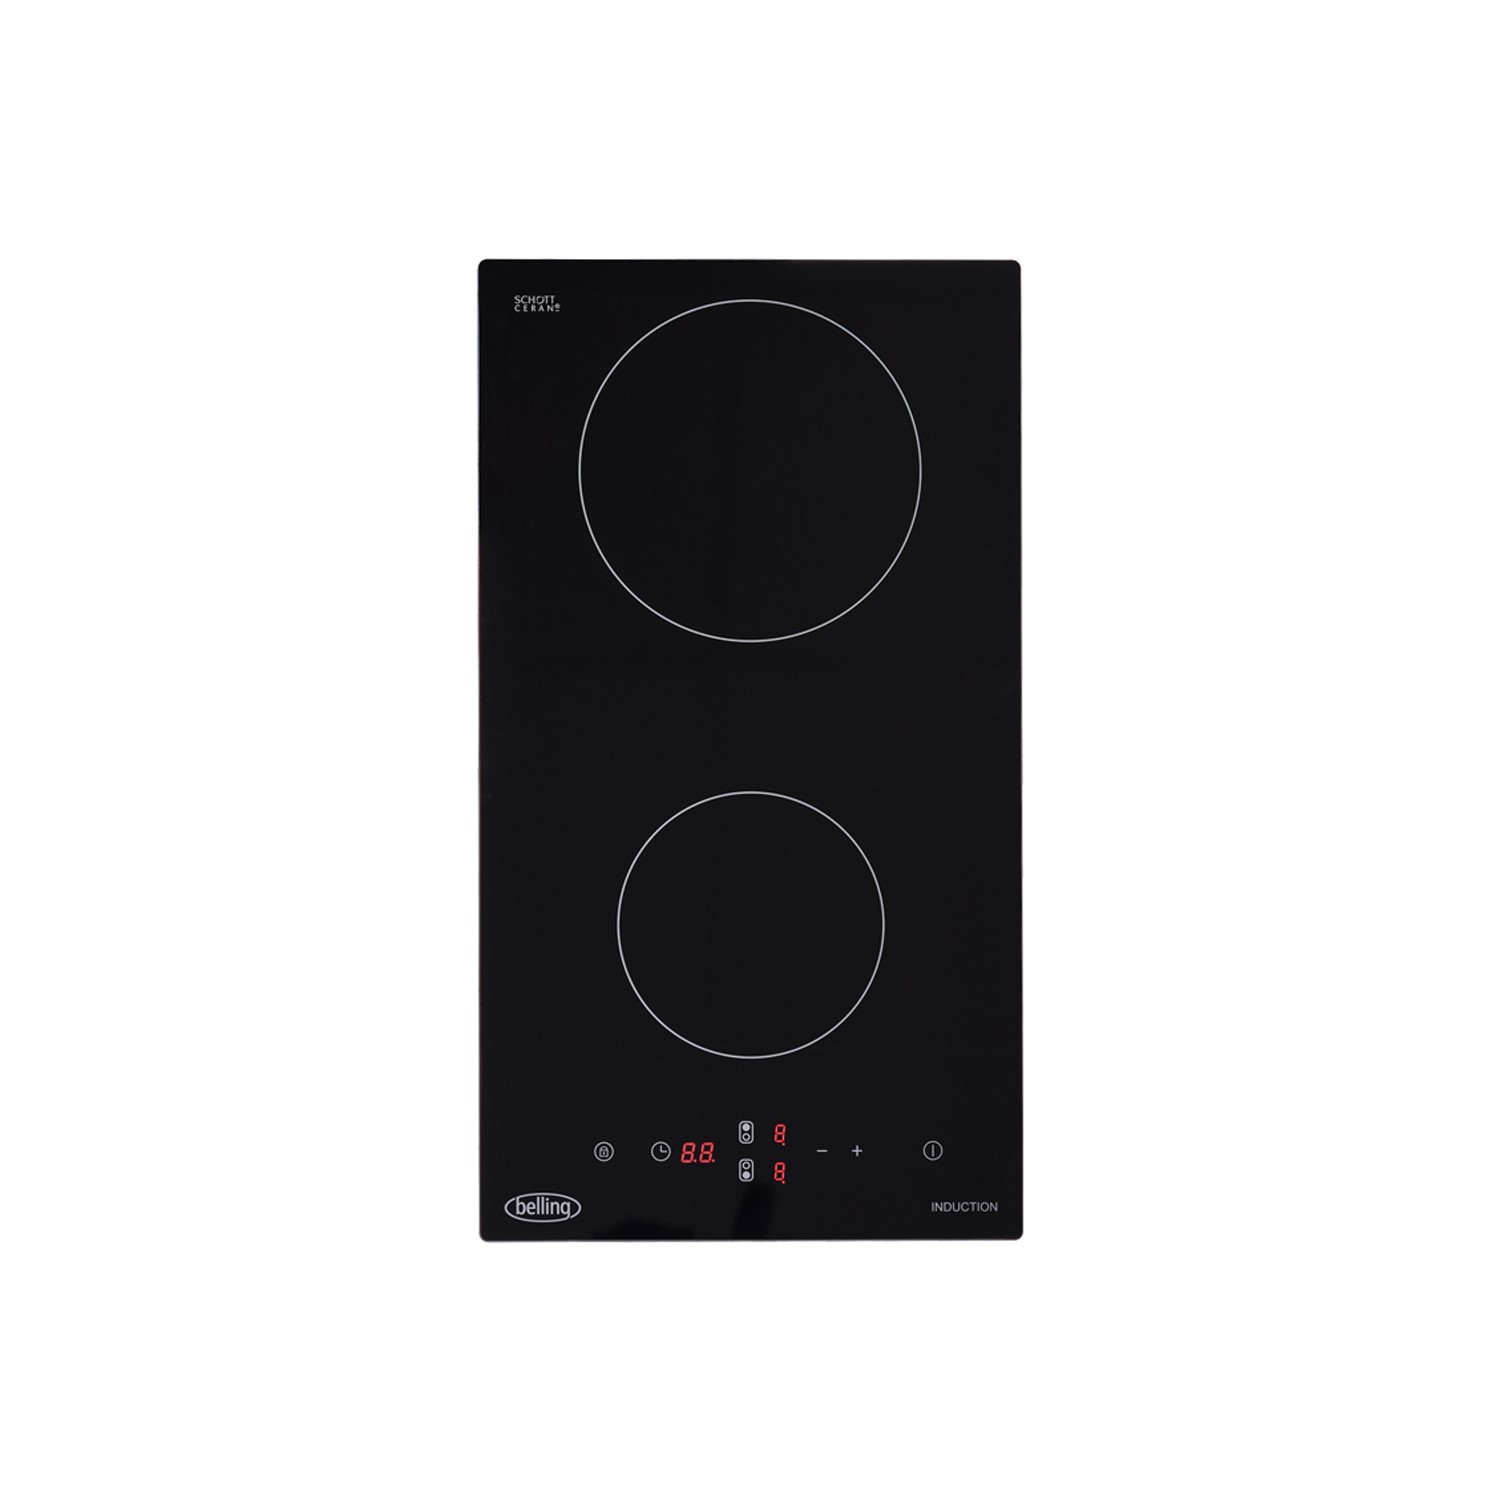 Belling IH302T 30cm 2 Zone Induction Hob